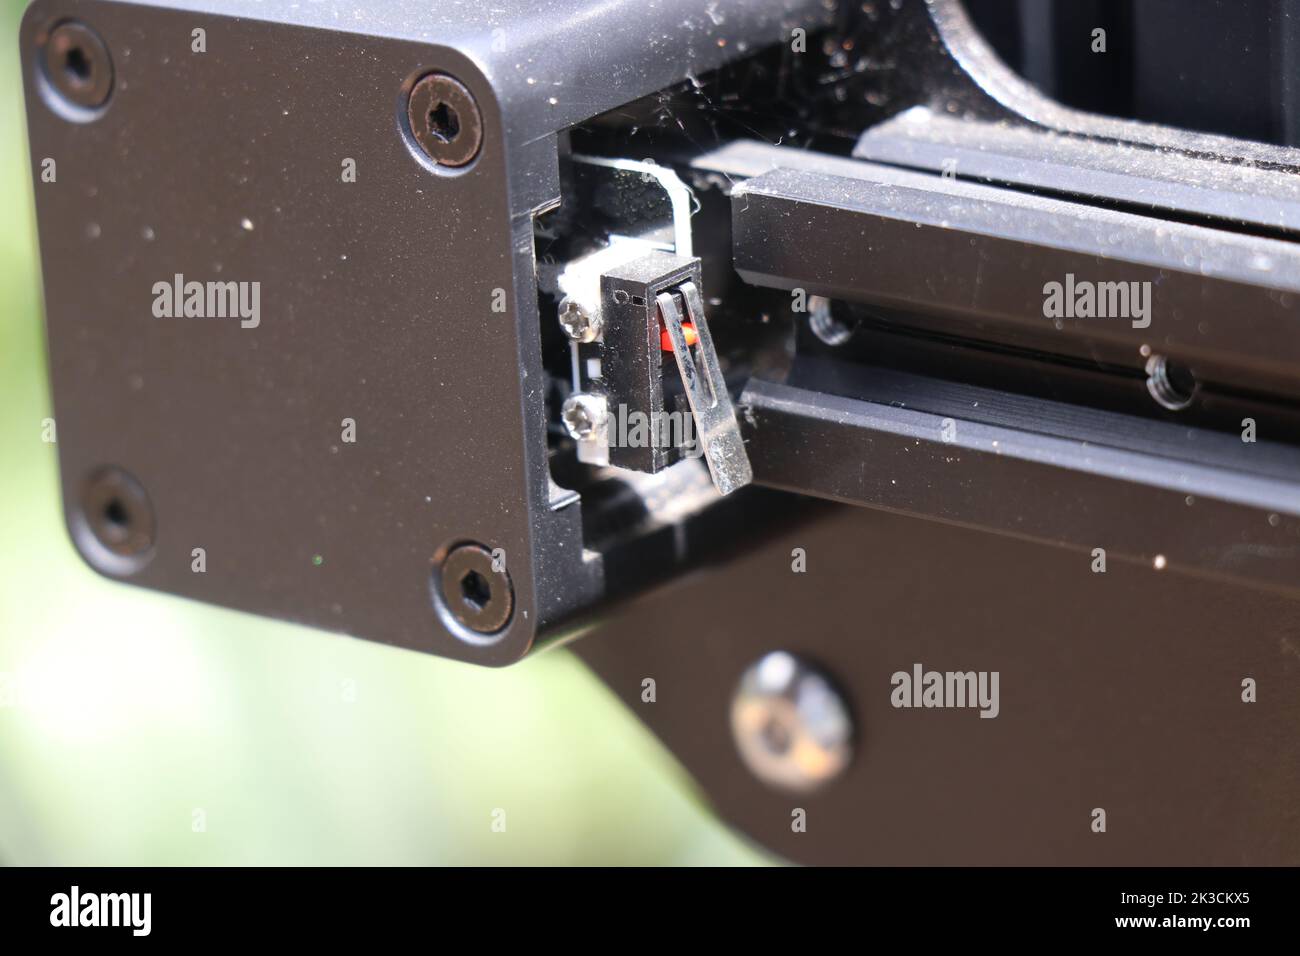 Limit switches are used on a 3d printer to limit the movements of stepper motors responsible for proper axis movements while printing Stock Photo